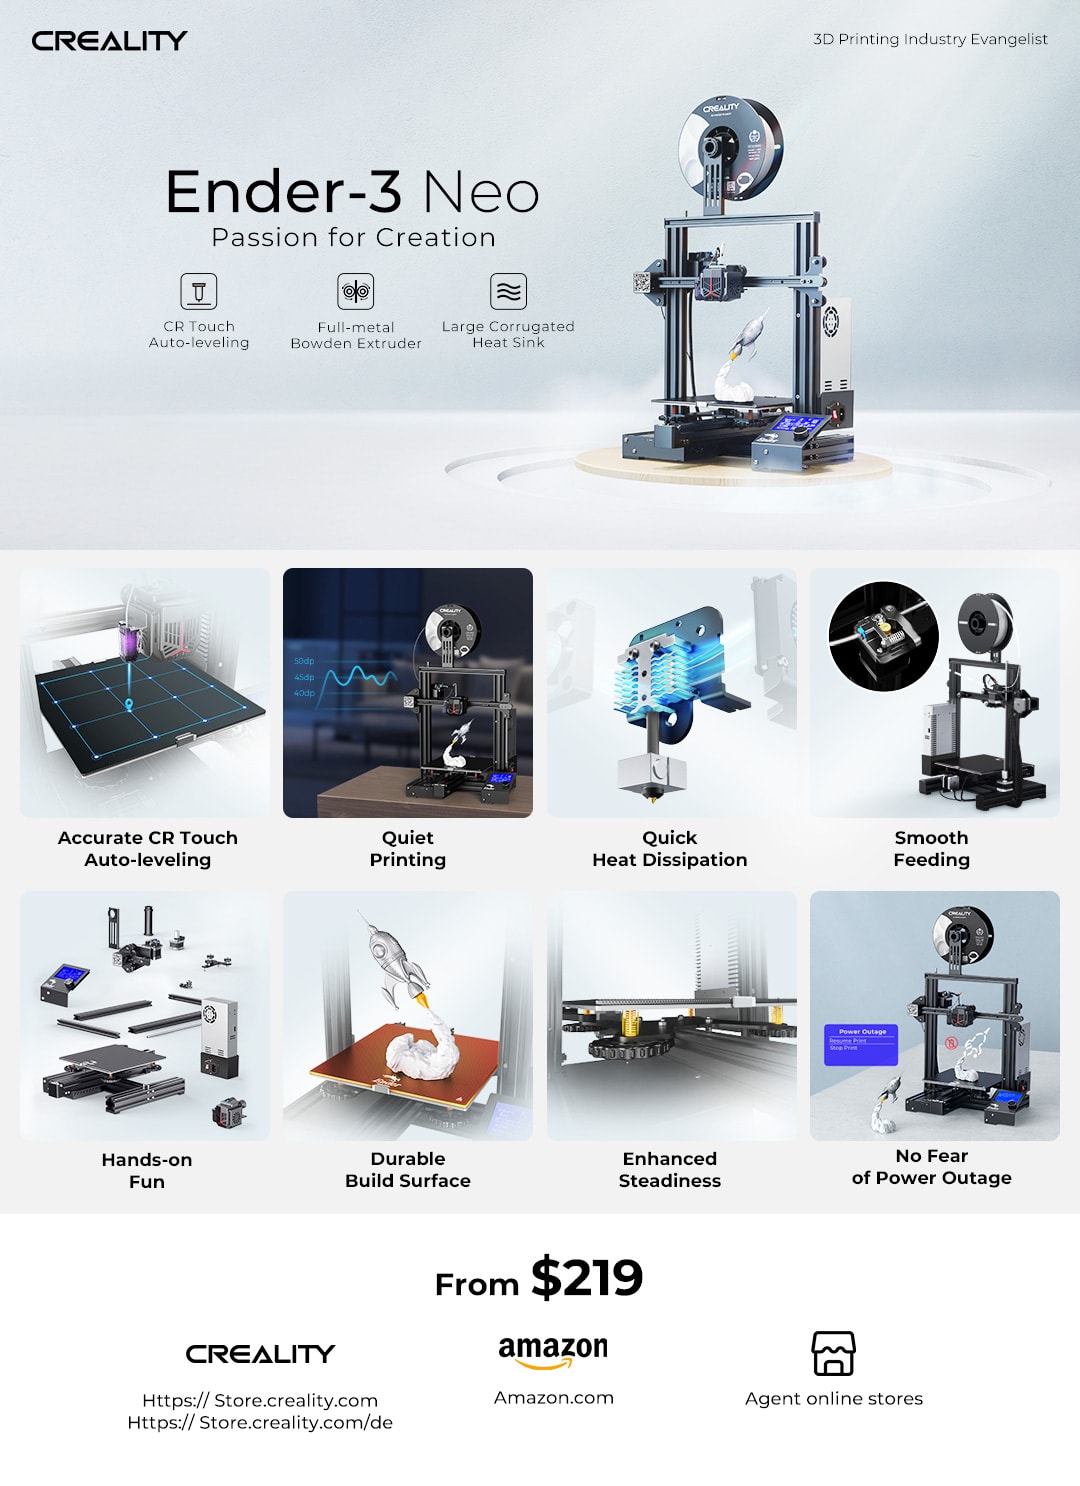 An overview of the price and features of the Ender-3 Neo 3D printer